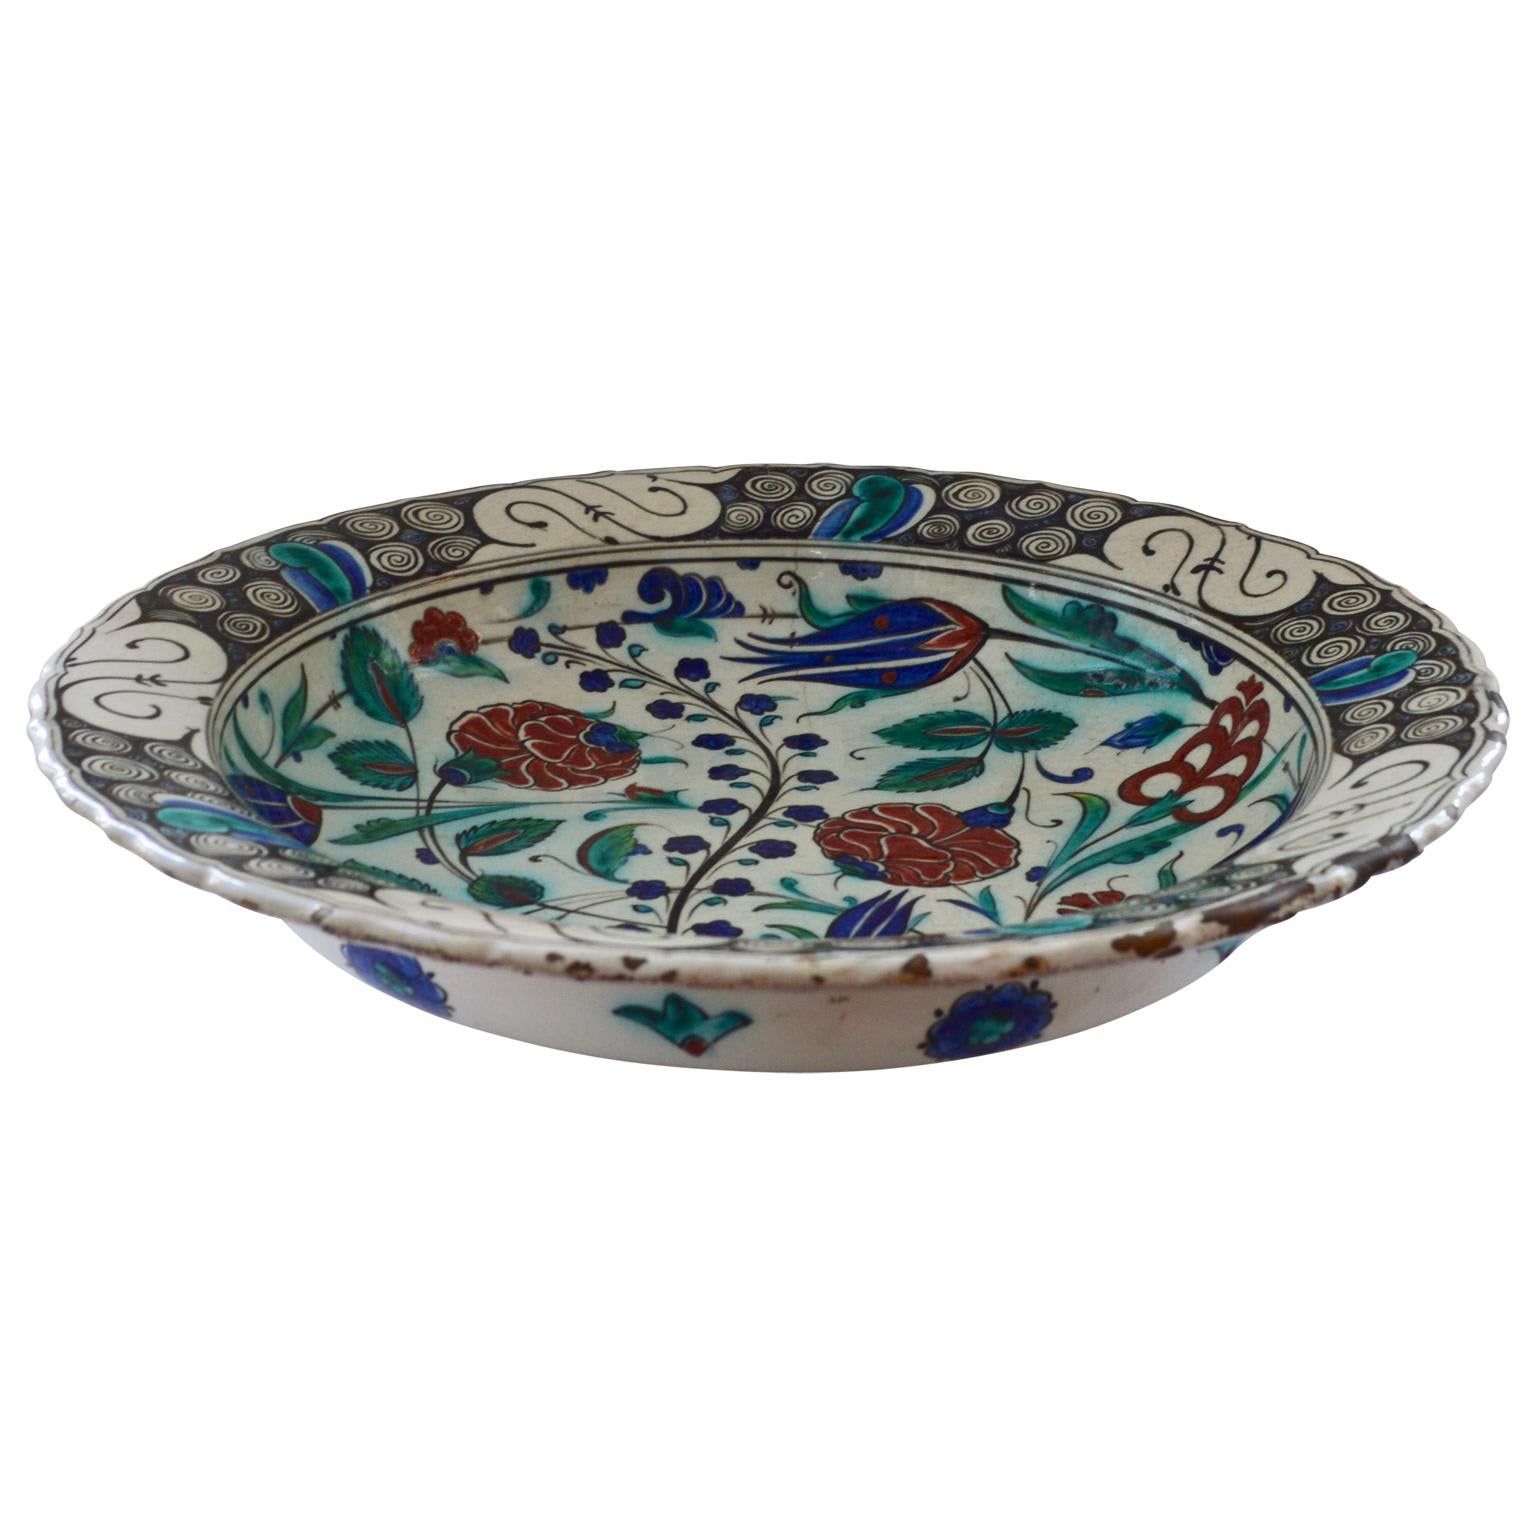 Large 19th Century Italian Iznik Style Faience Charger, By Ulisse Cantagalli of Florence Italy

Provenance: From the Collection of Danish Supreme Court Advocates H.H. Bruun and Jonas Bruun's .

19th Century Cantagalli Iznik charger with floral